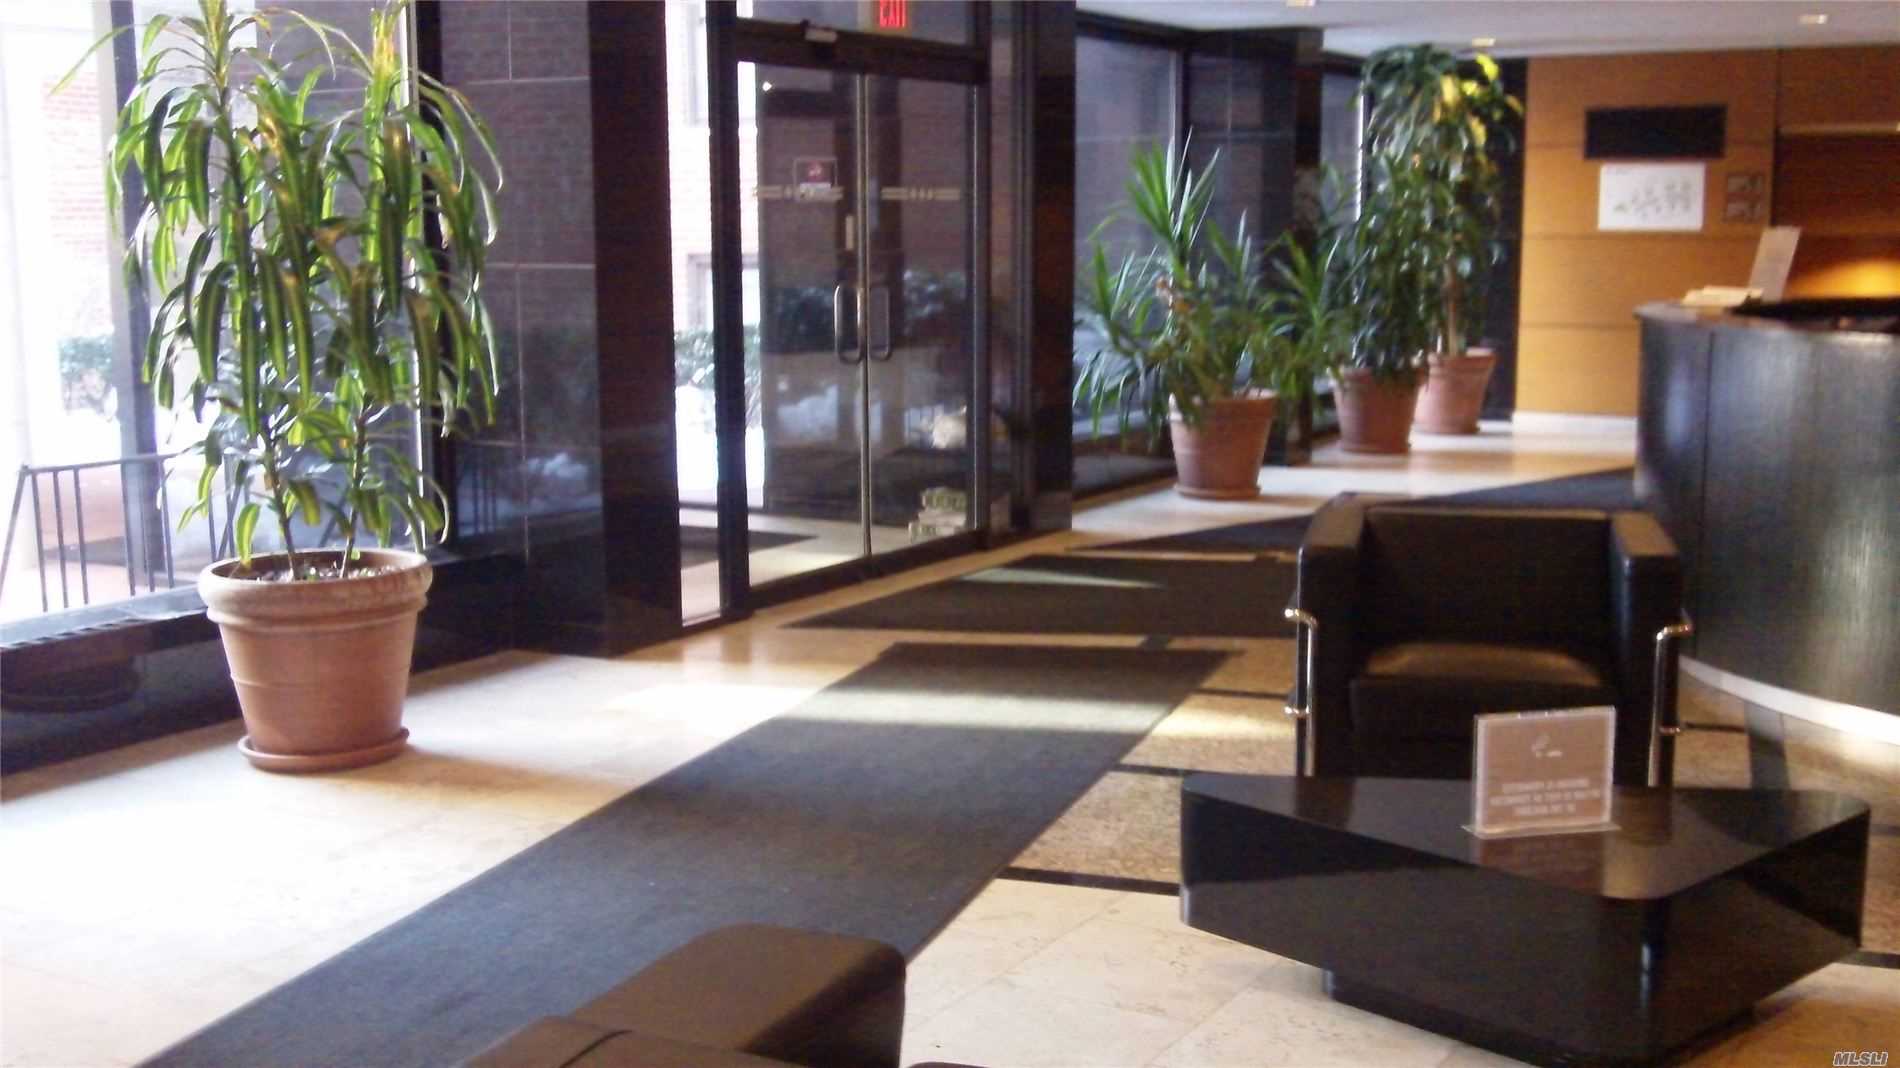 a view of a lobby with chair and potted plants